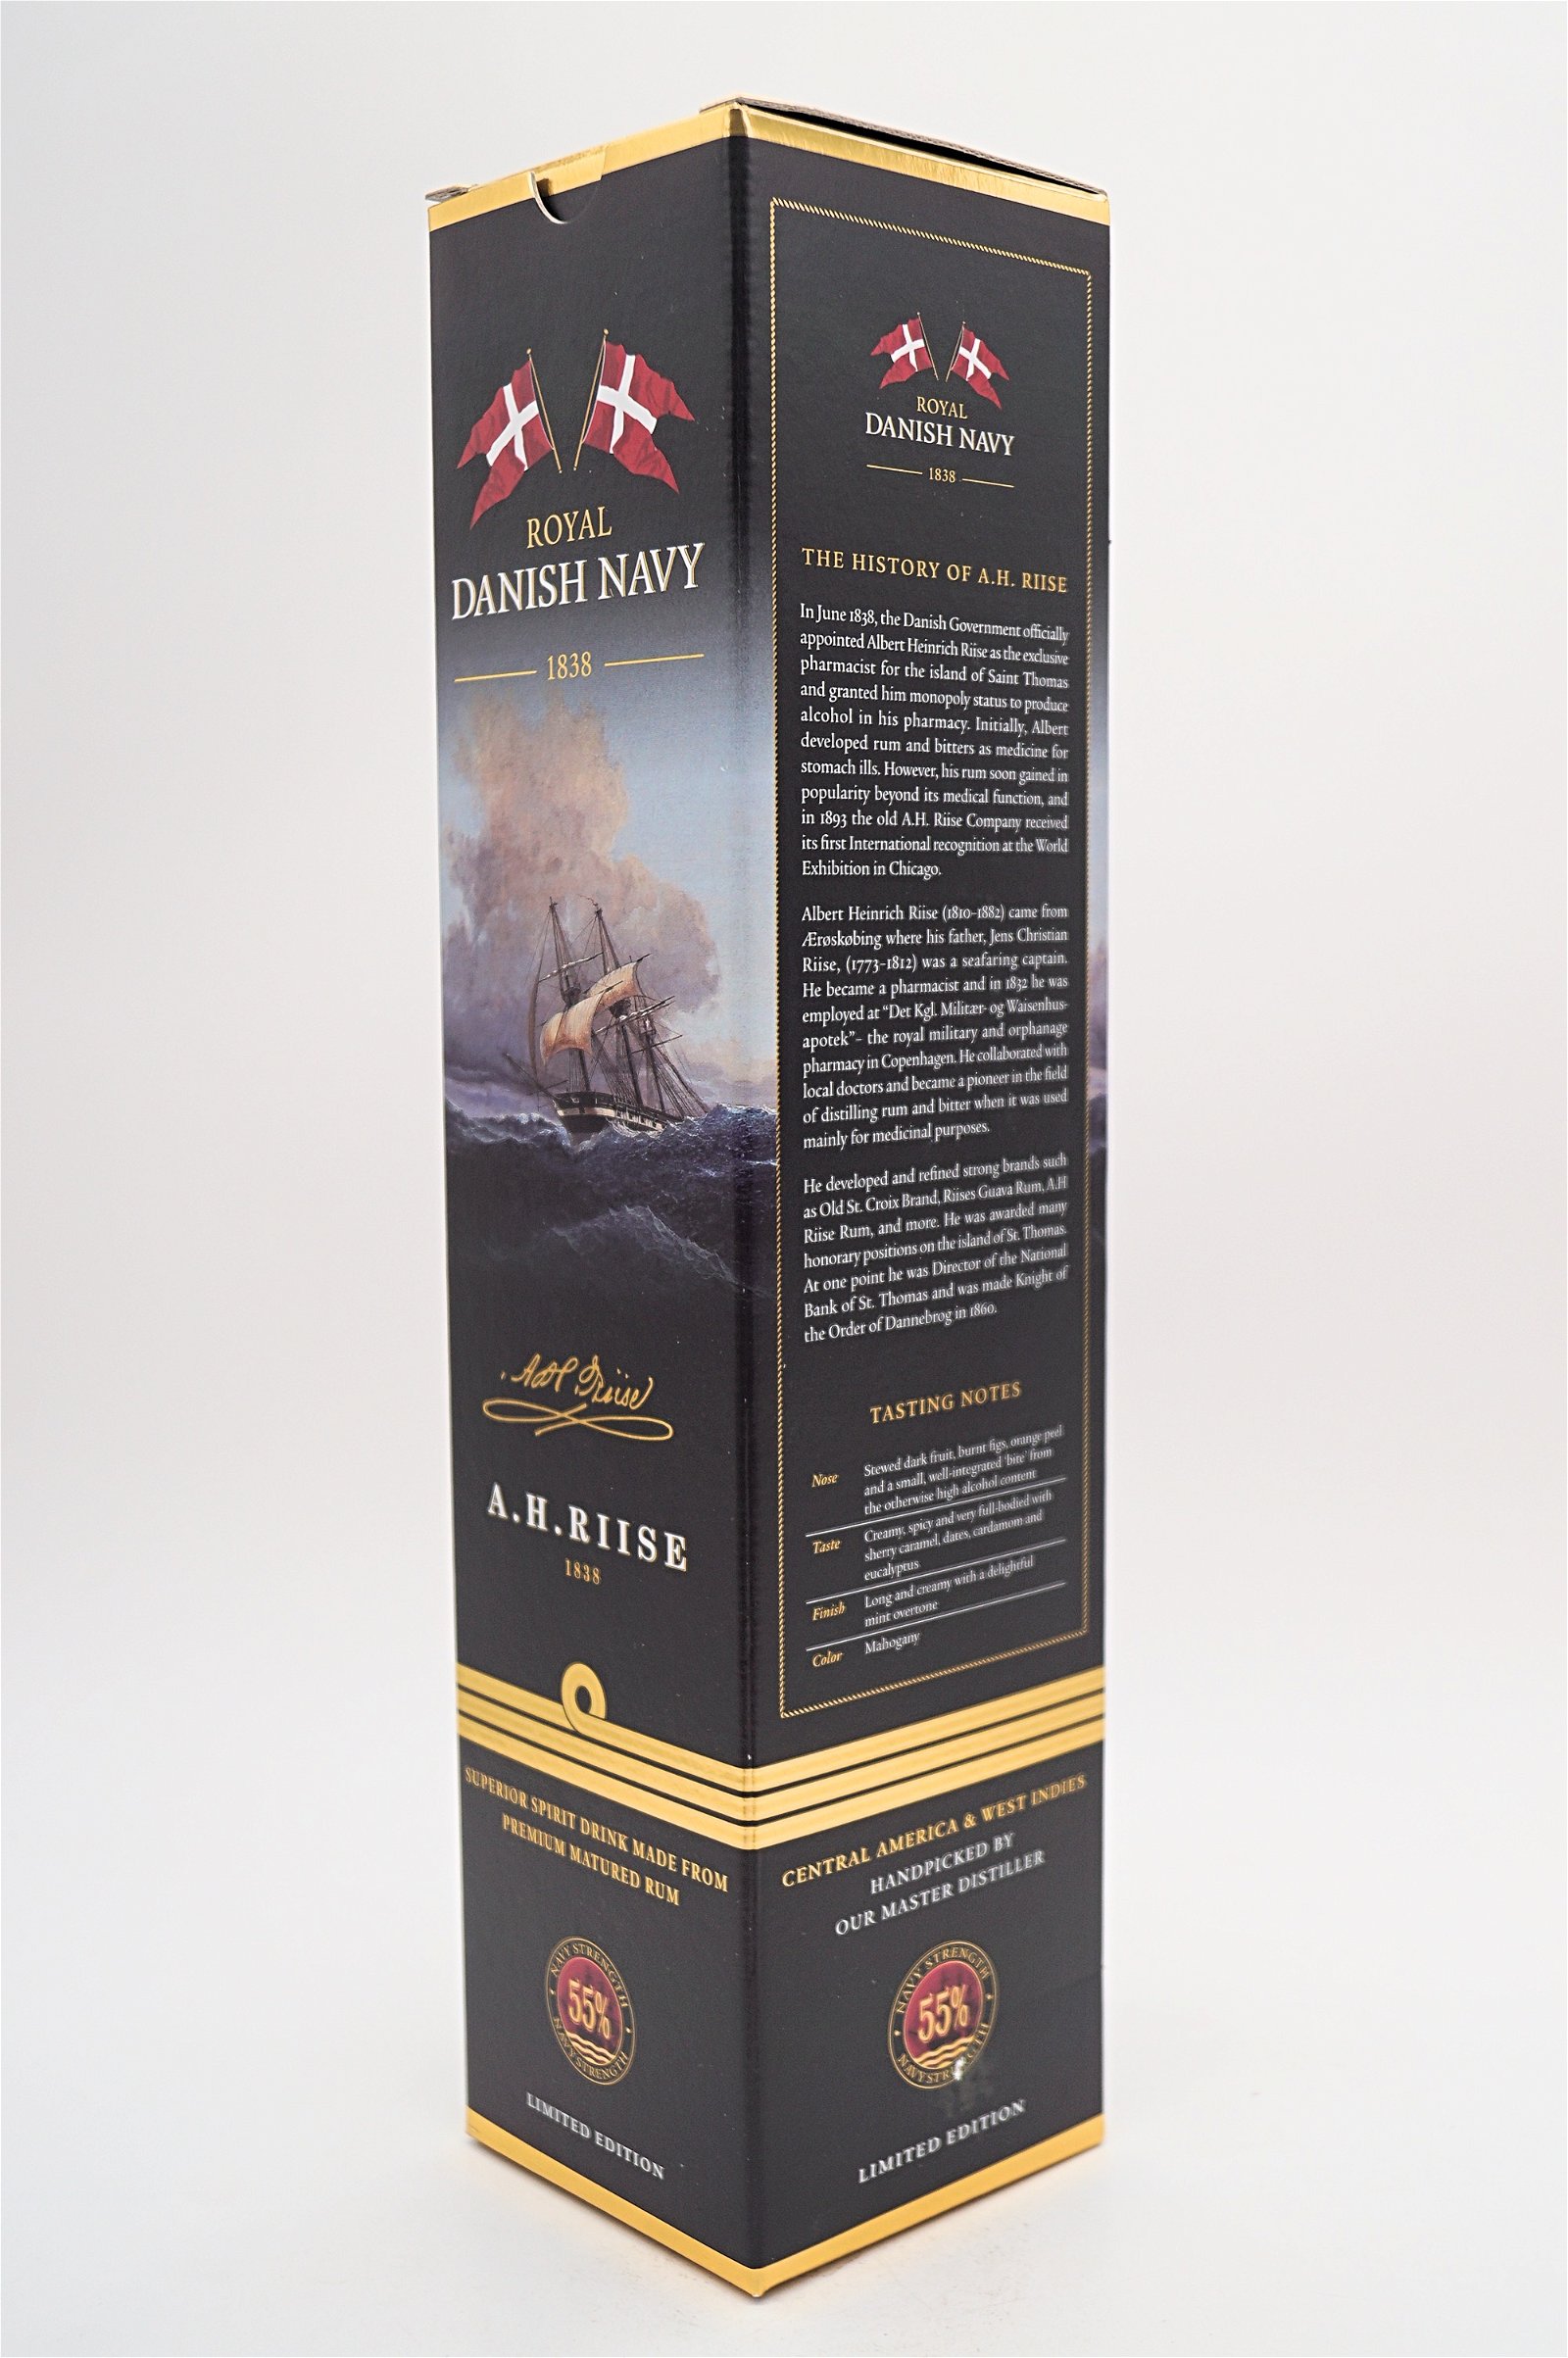 A.H.Riise Royal Danish Navy Strength Rum